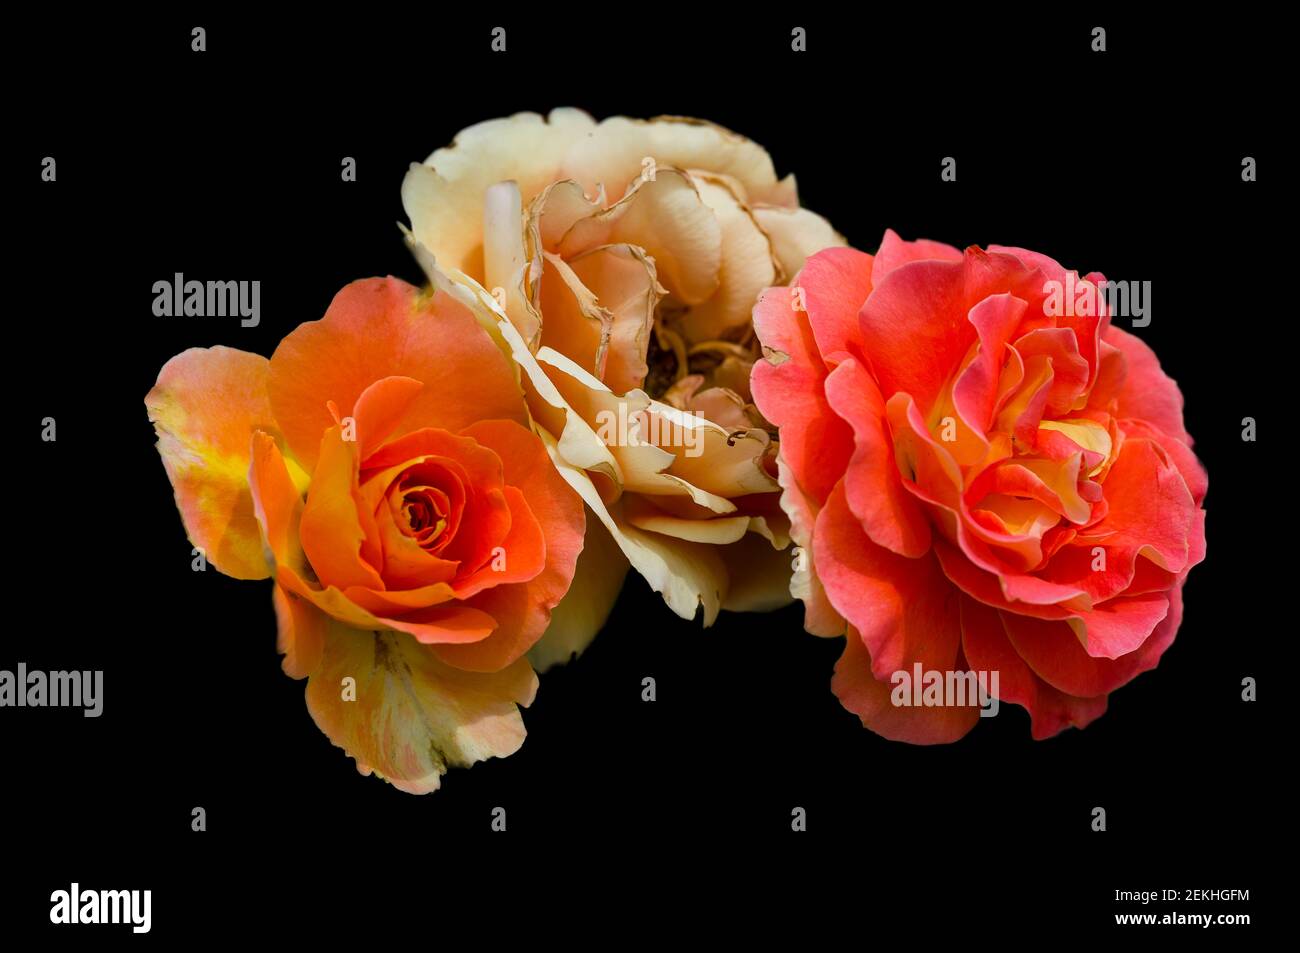 Close-up of three rose flowers against black background Stock Photo